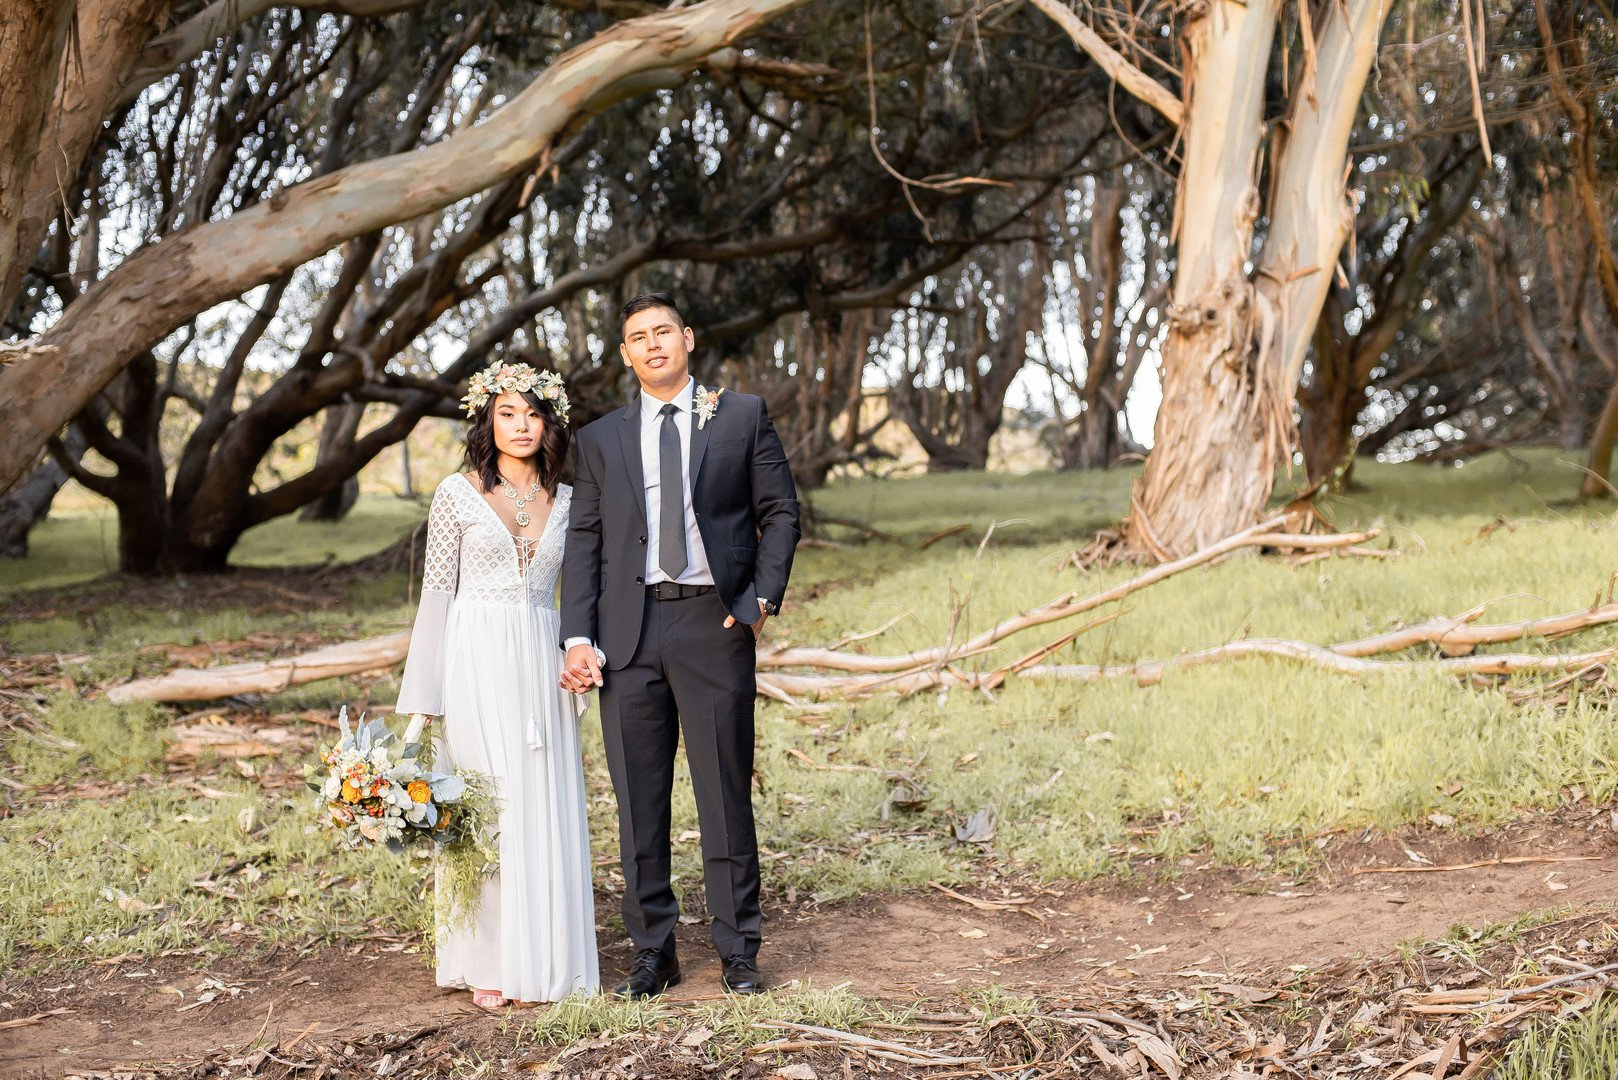 www.santabarbarawedding.com | Staci and Michael Photography | Montana de Oro State Park | EverAfter Wood Floral | Express | Makeup by Madisen Wickliffe | Bride and groom